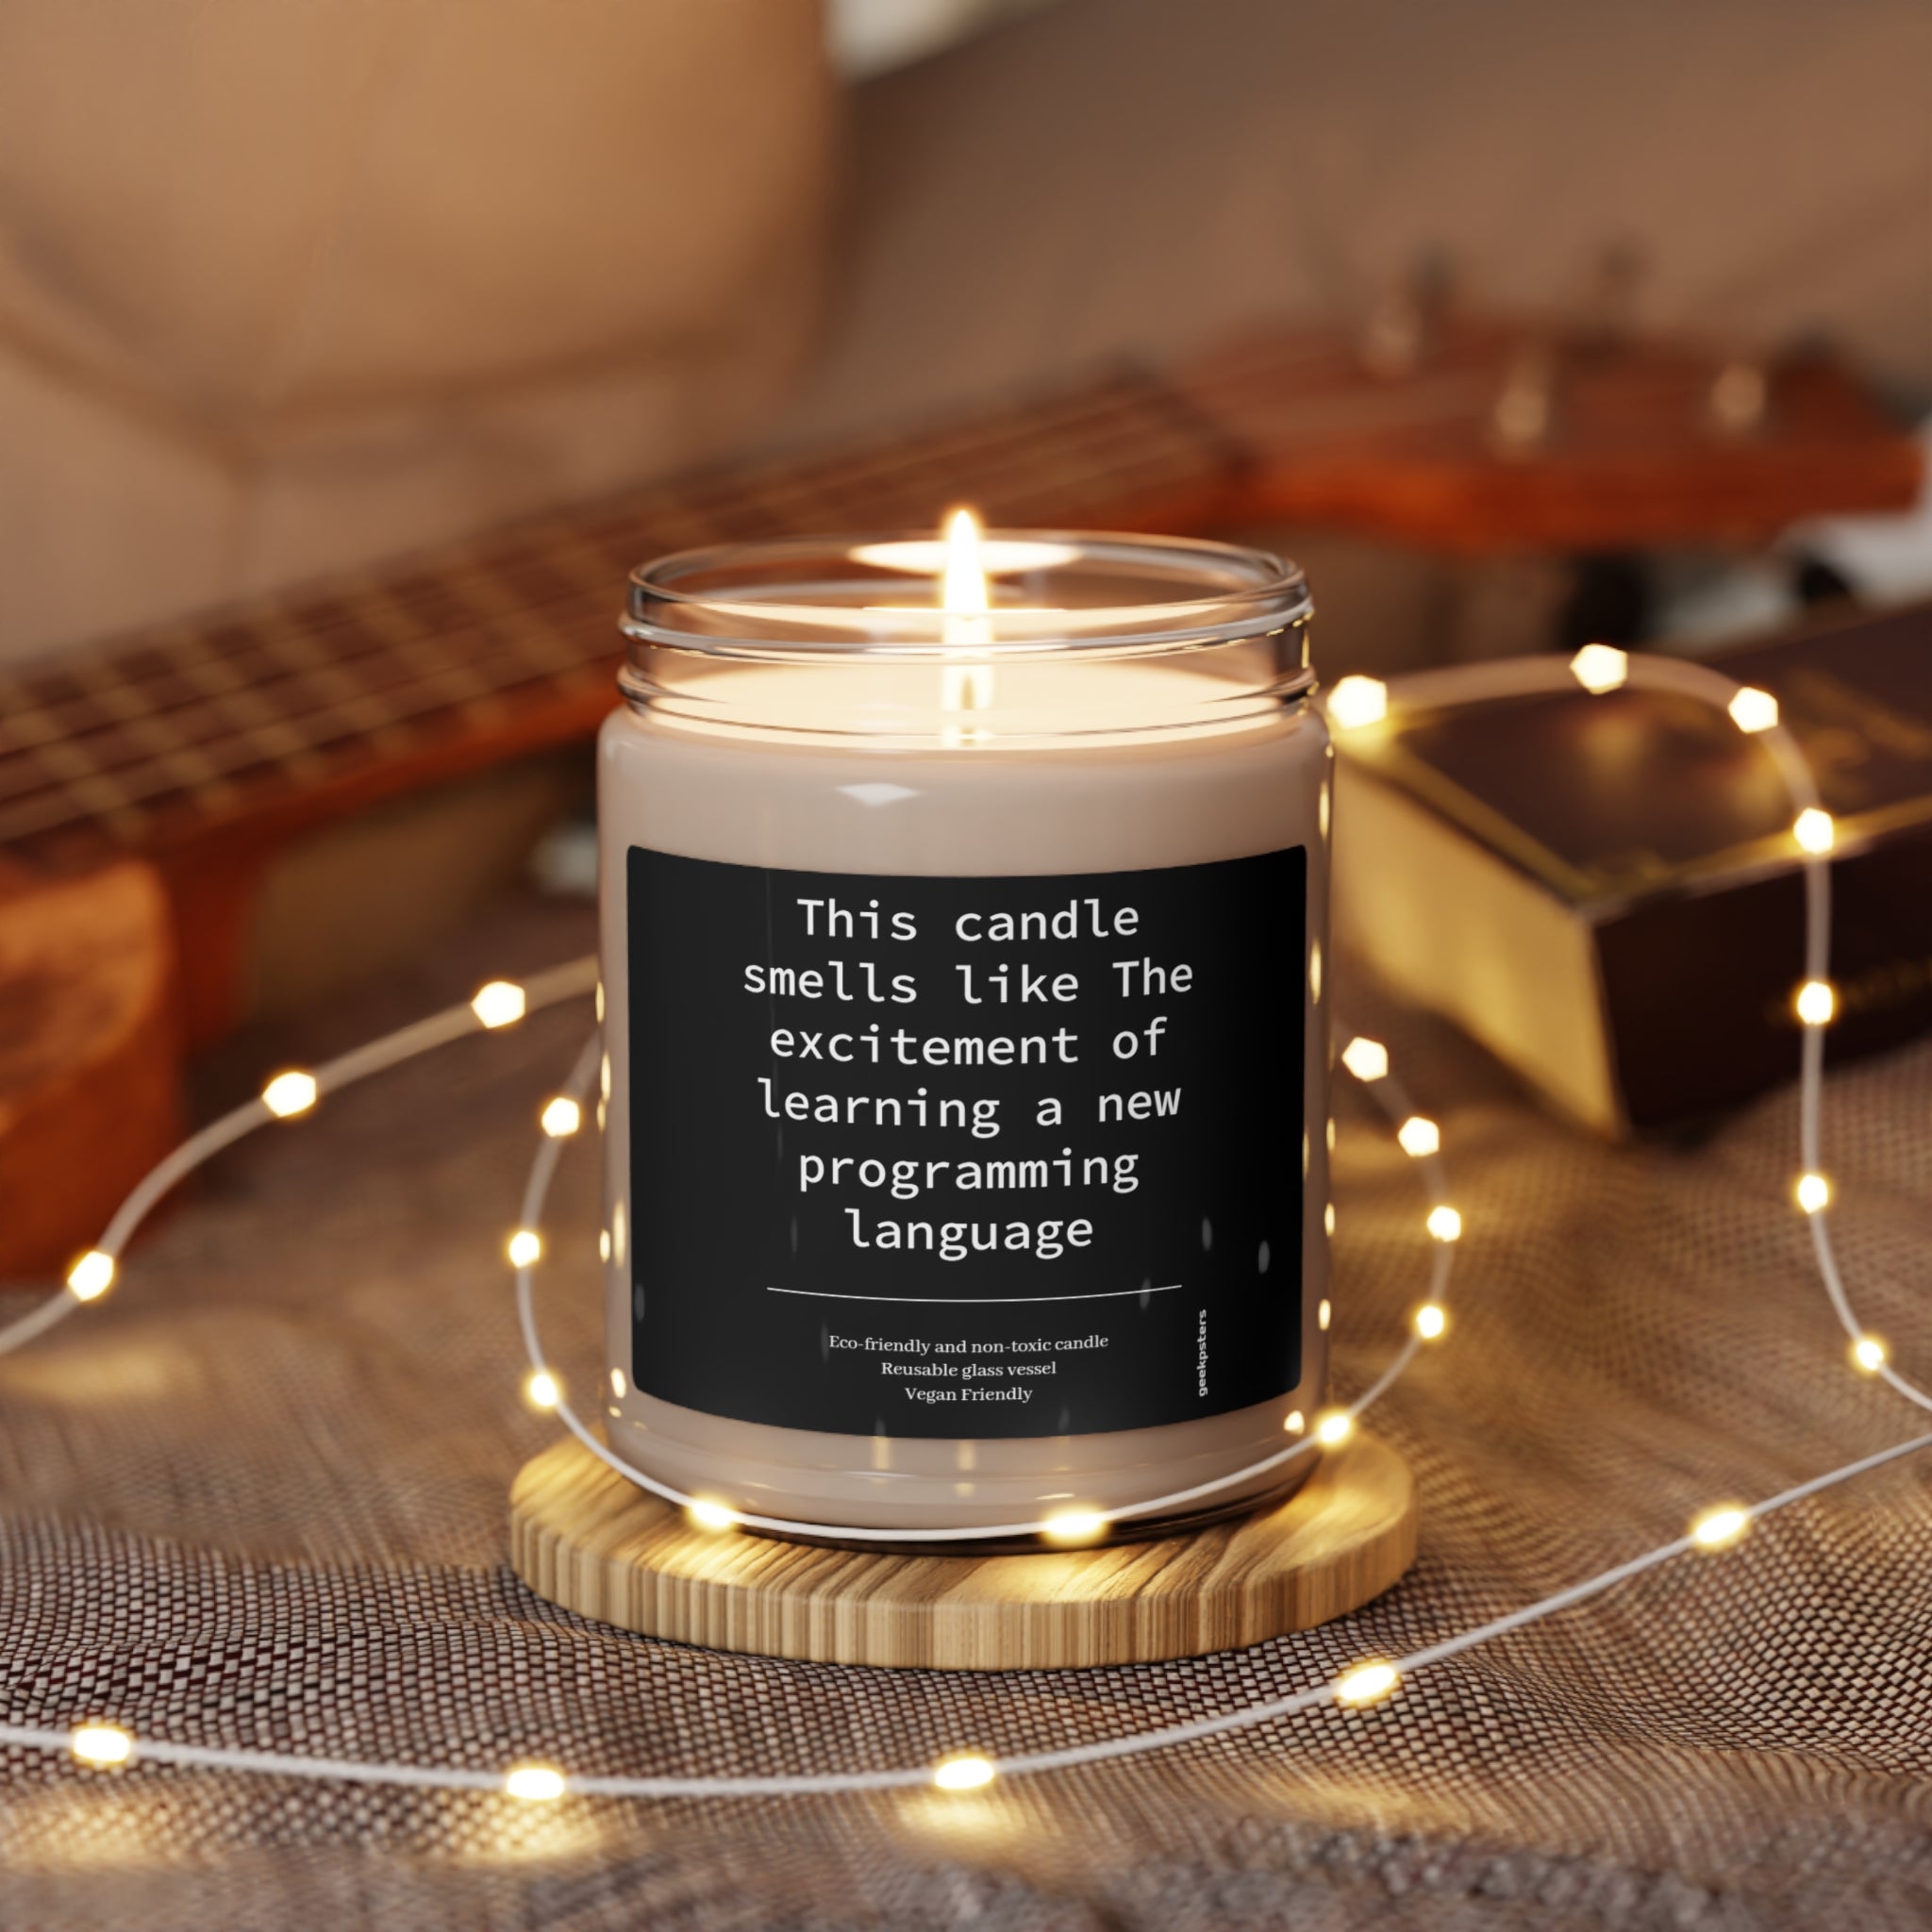 A This Candle Smells Like The Excitement of Learning a New Programming Language - Scented Soy Candle, 9oz illuminated by string lights on a cozy background.